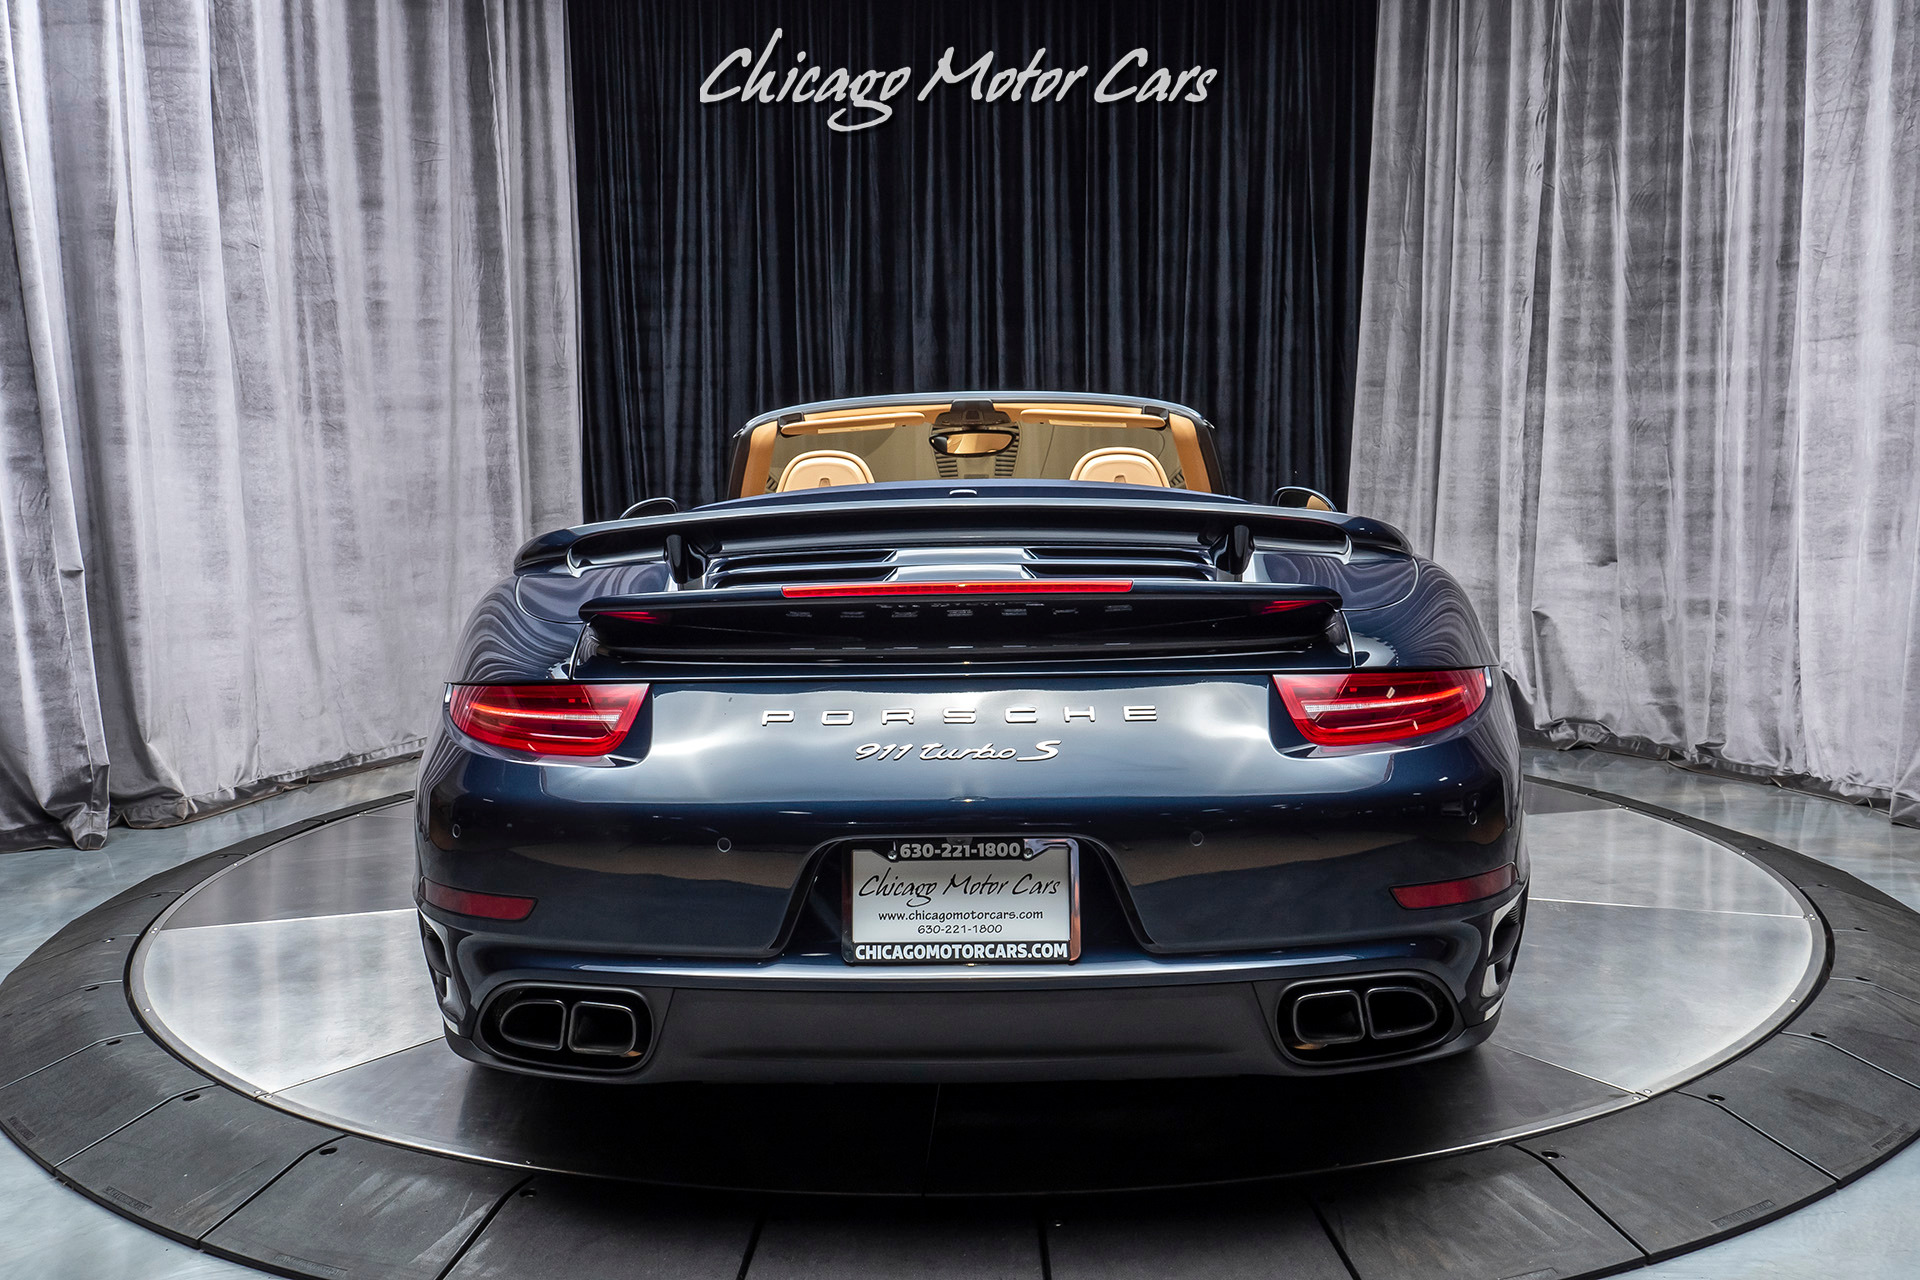 Used-2014-Porsche-911-Turbo-S-Convertible-MSRP-215470--SAM-AHDOOT-STAGE-4-WITH-METH-INJECTION